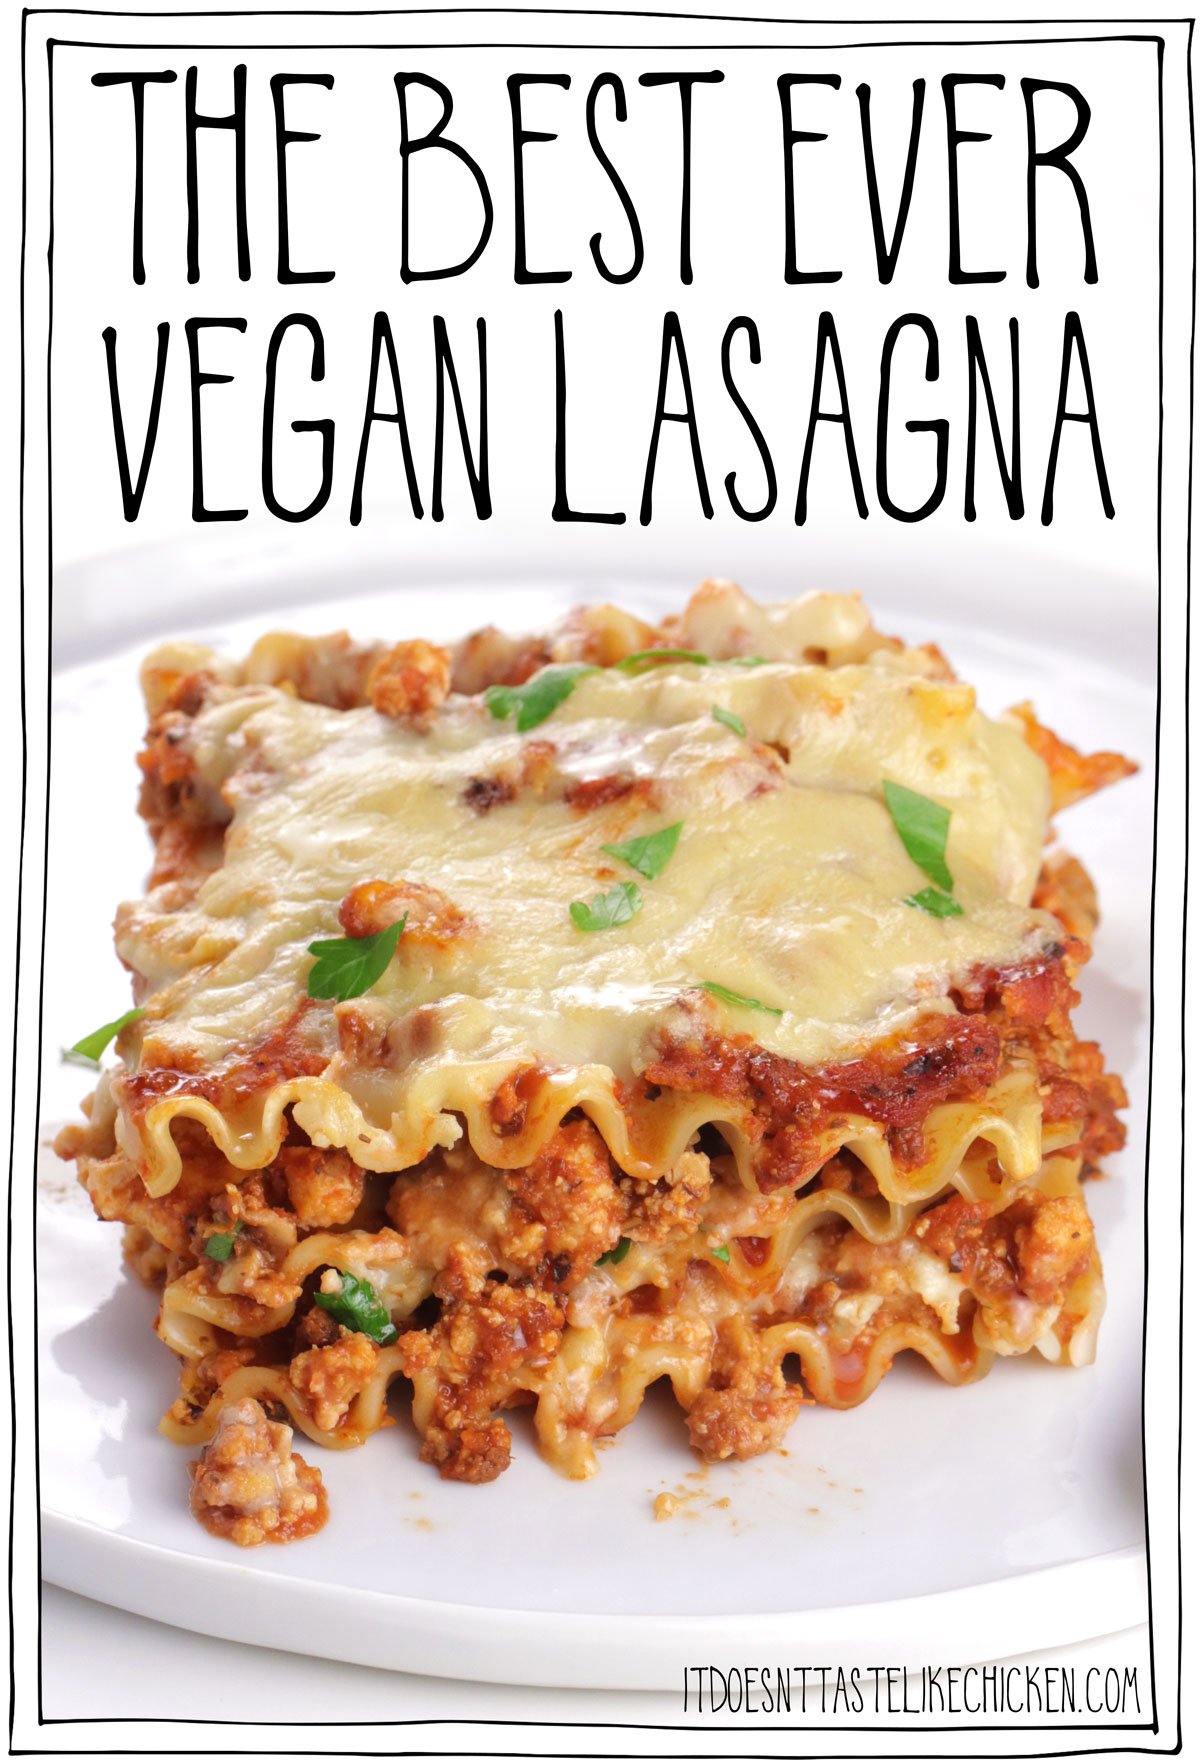 With layers of a vegan meaty bolognese sauce, lasagna noodles, homemade cashew vegan ricotta (which takes less than 5 minutes to make), all topped with a 5-minute vegan mozzarella sauce you have yourself The Best Ever Vegan Lasagna!!! It's meaty, cheesy, creamy, and so delicious, no one will be able to tell it's vegan! 